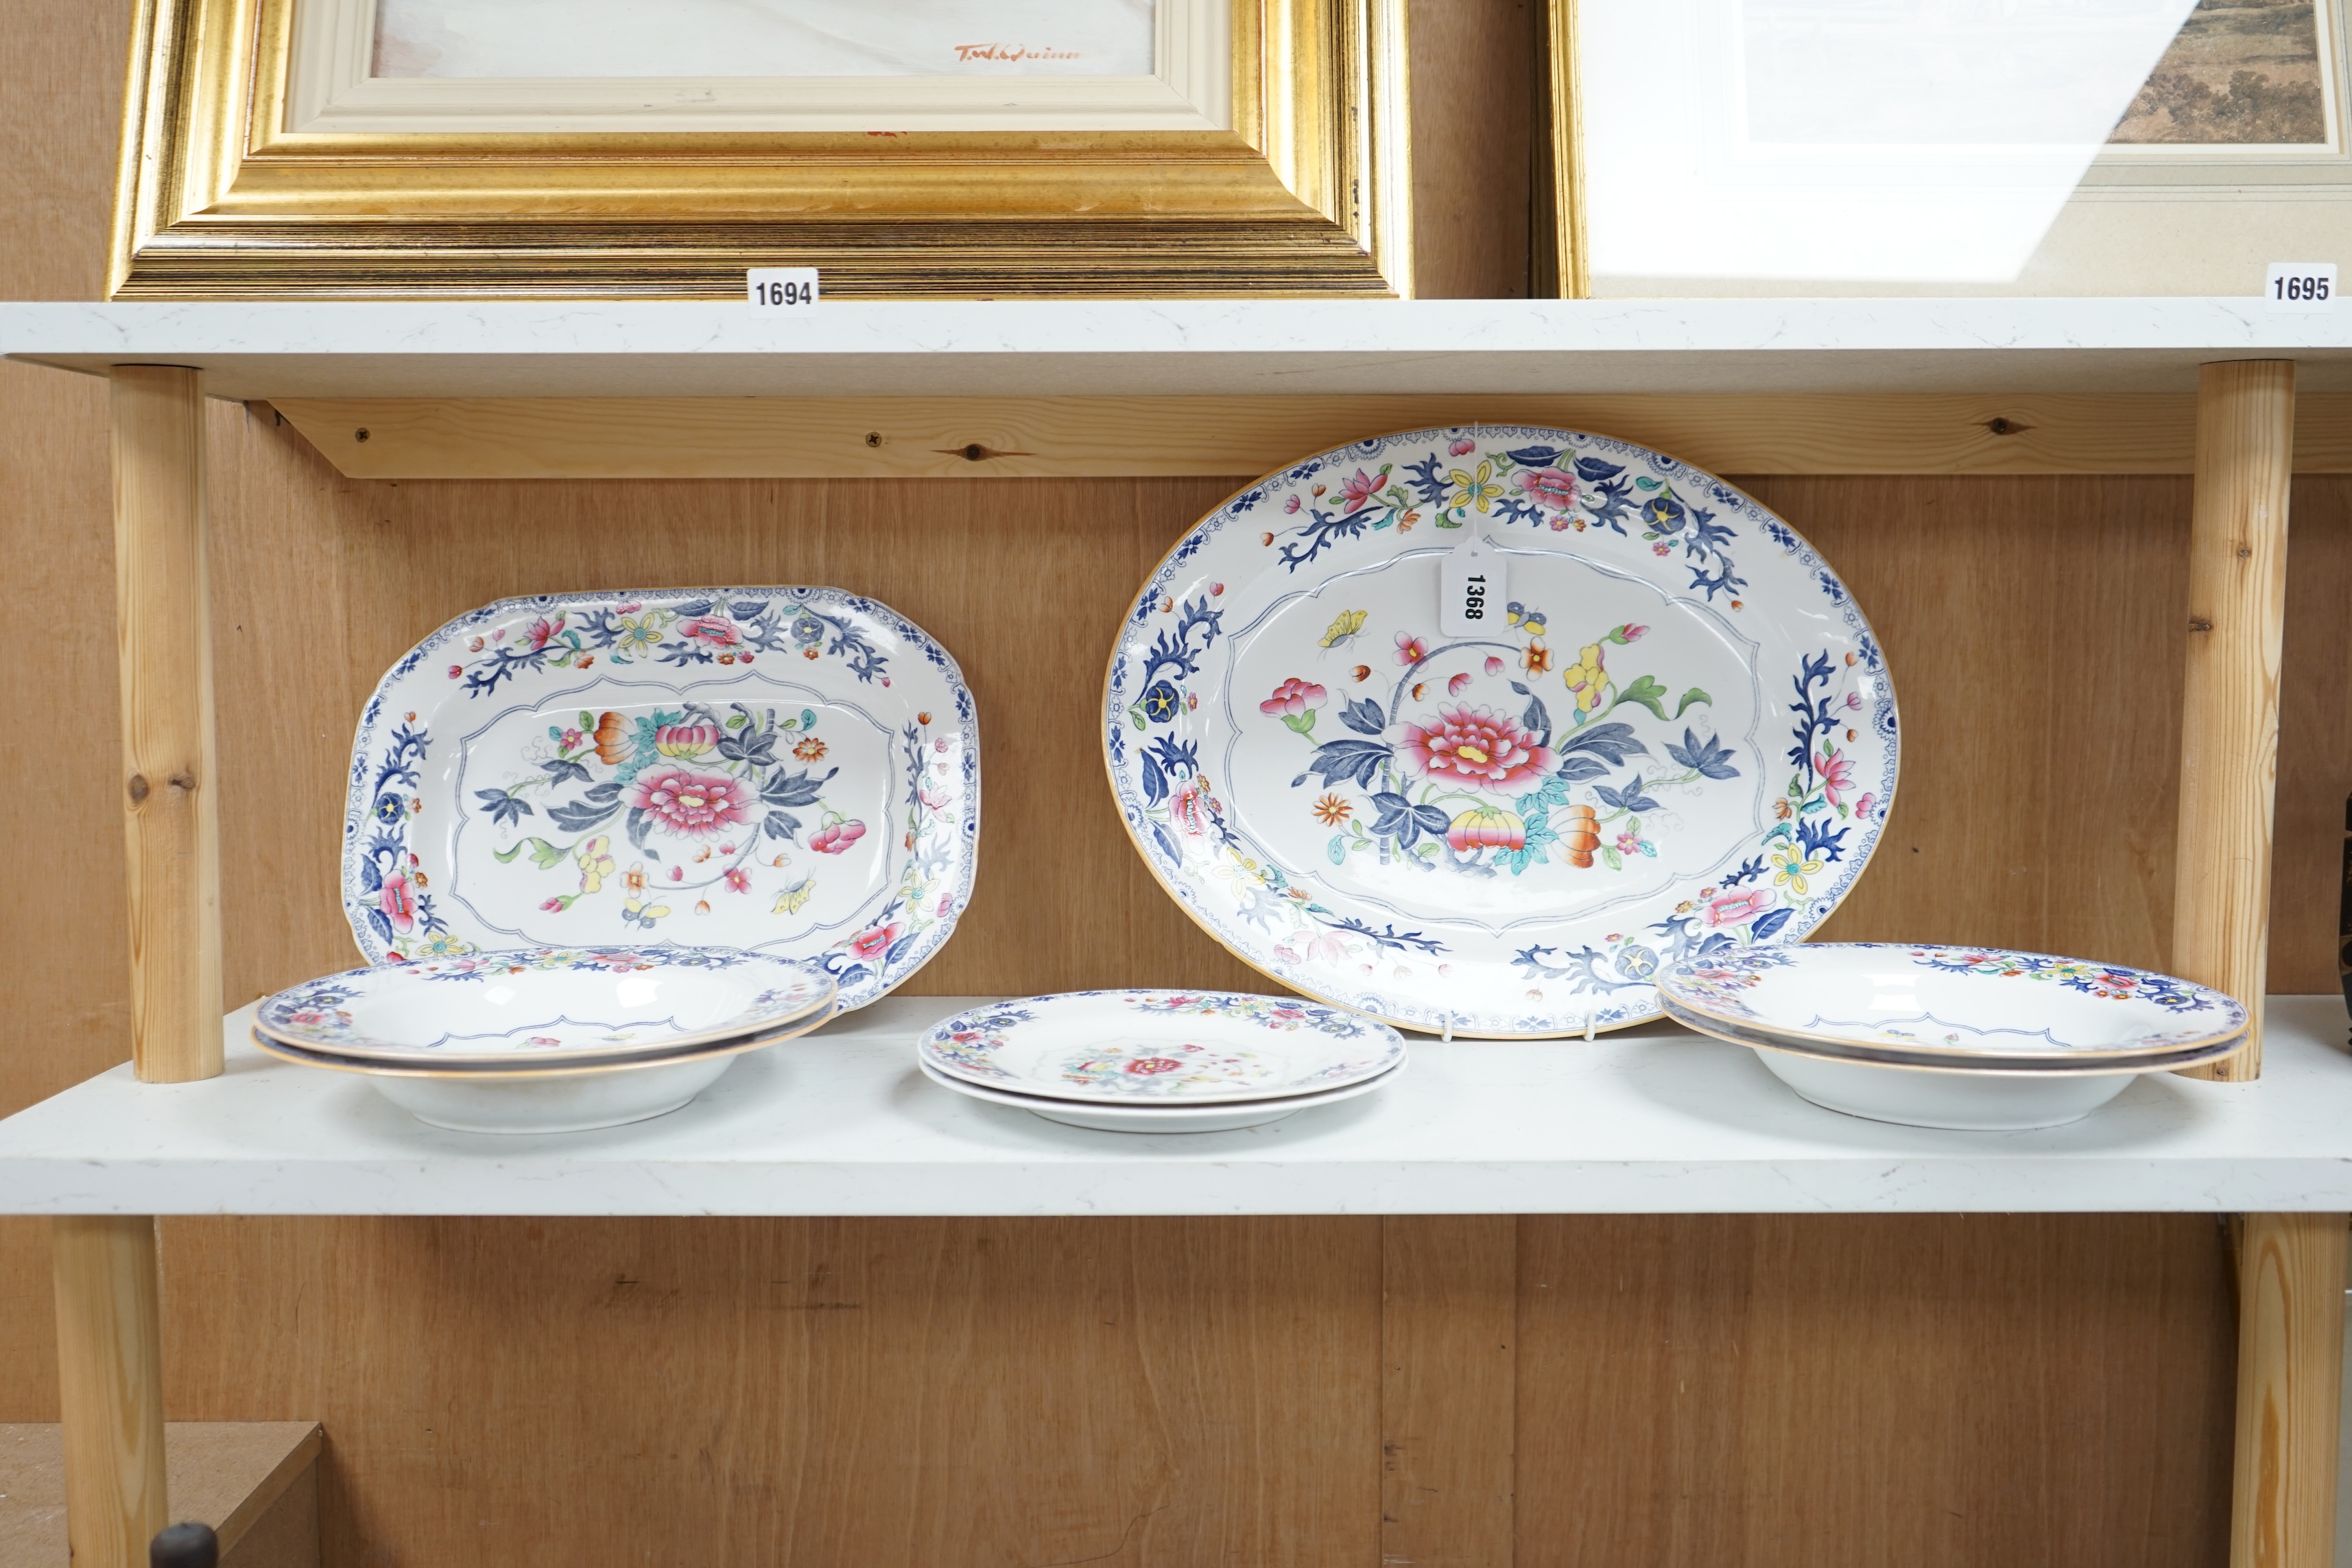 Spode Copeland dinner ware, comprising an oval and a rectangular meat dish and six plates, each painted with peonies and other flowers, largest 43cm wide (8). Condition - poor